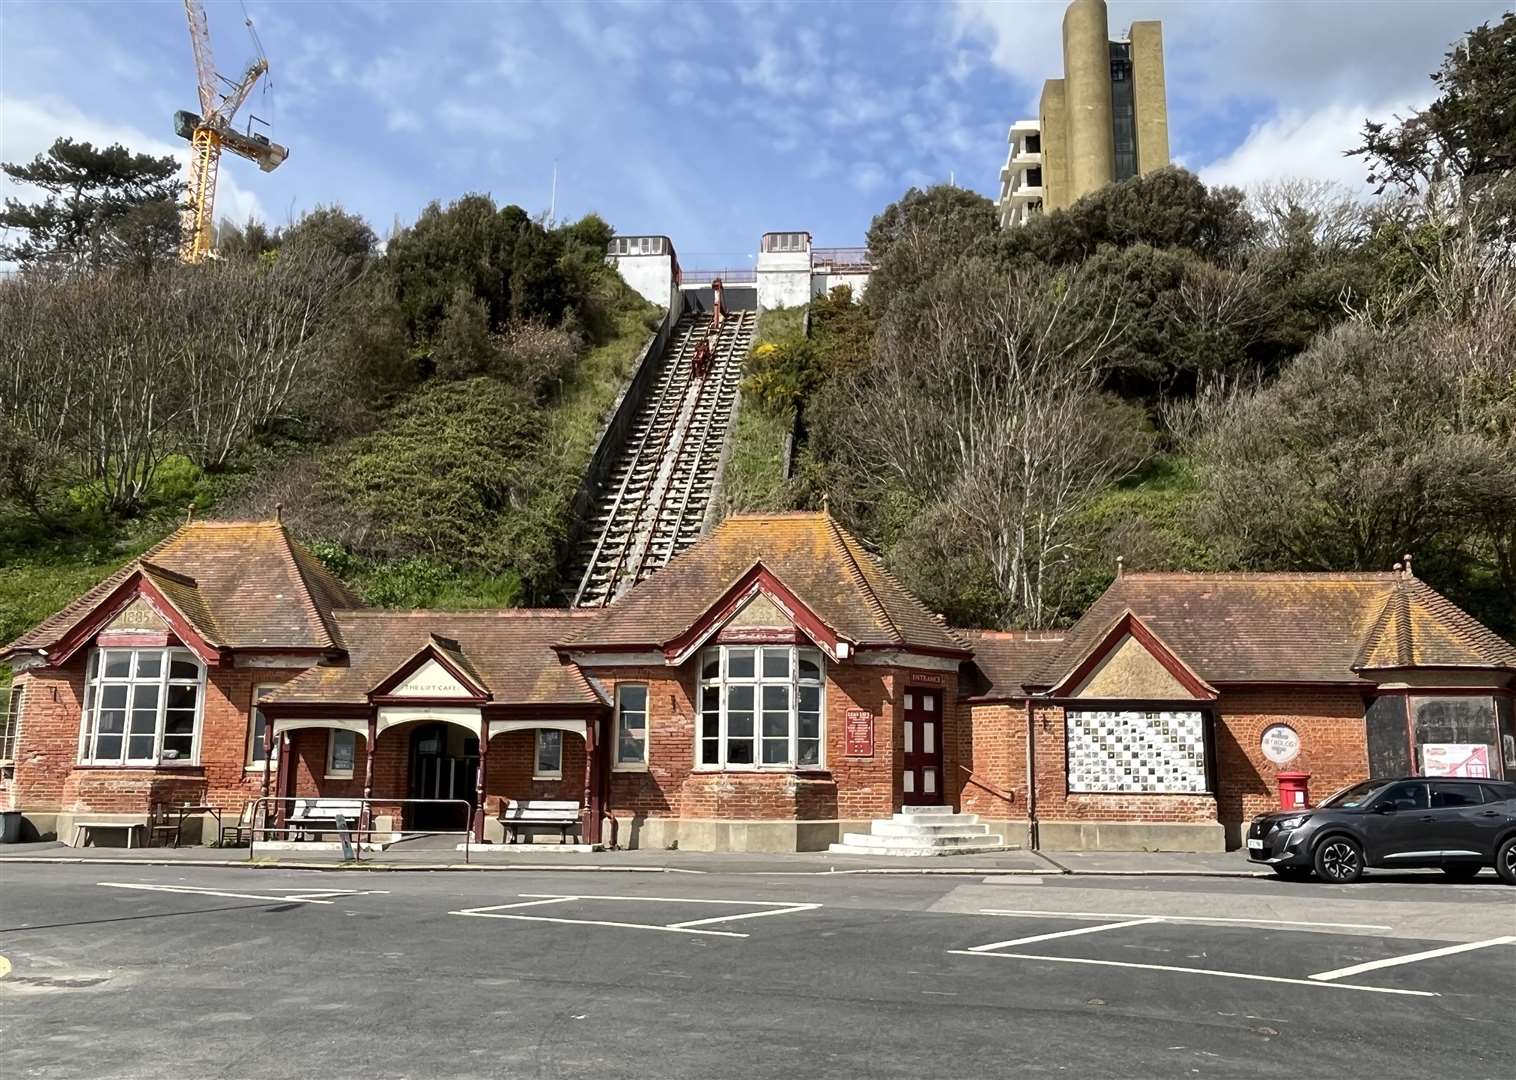 Plans for the Leas Lift restoration project include fixing the lift, improving the waiting room, and creating a new building to house a modern cafe with an outdoor terrace